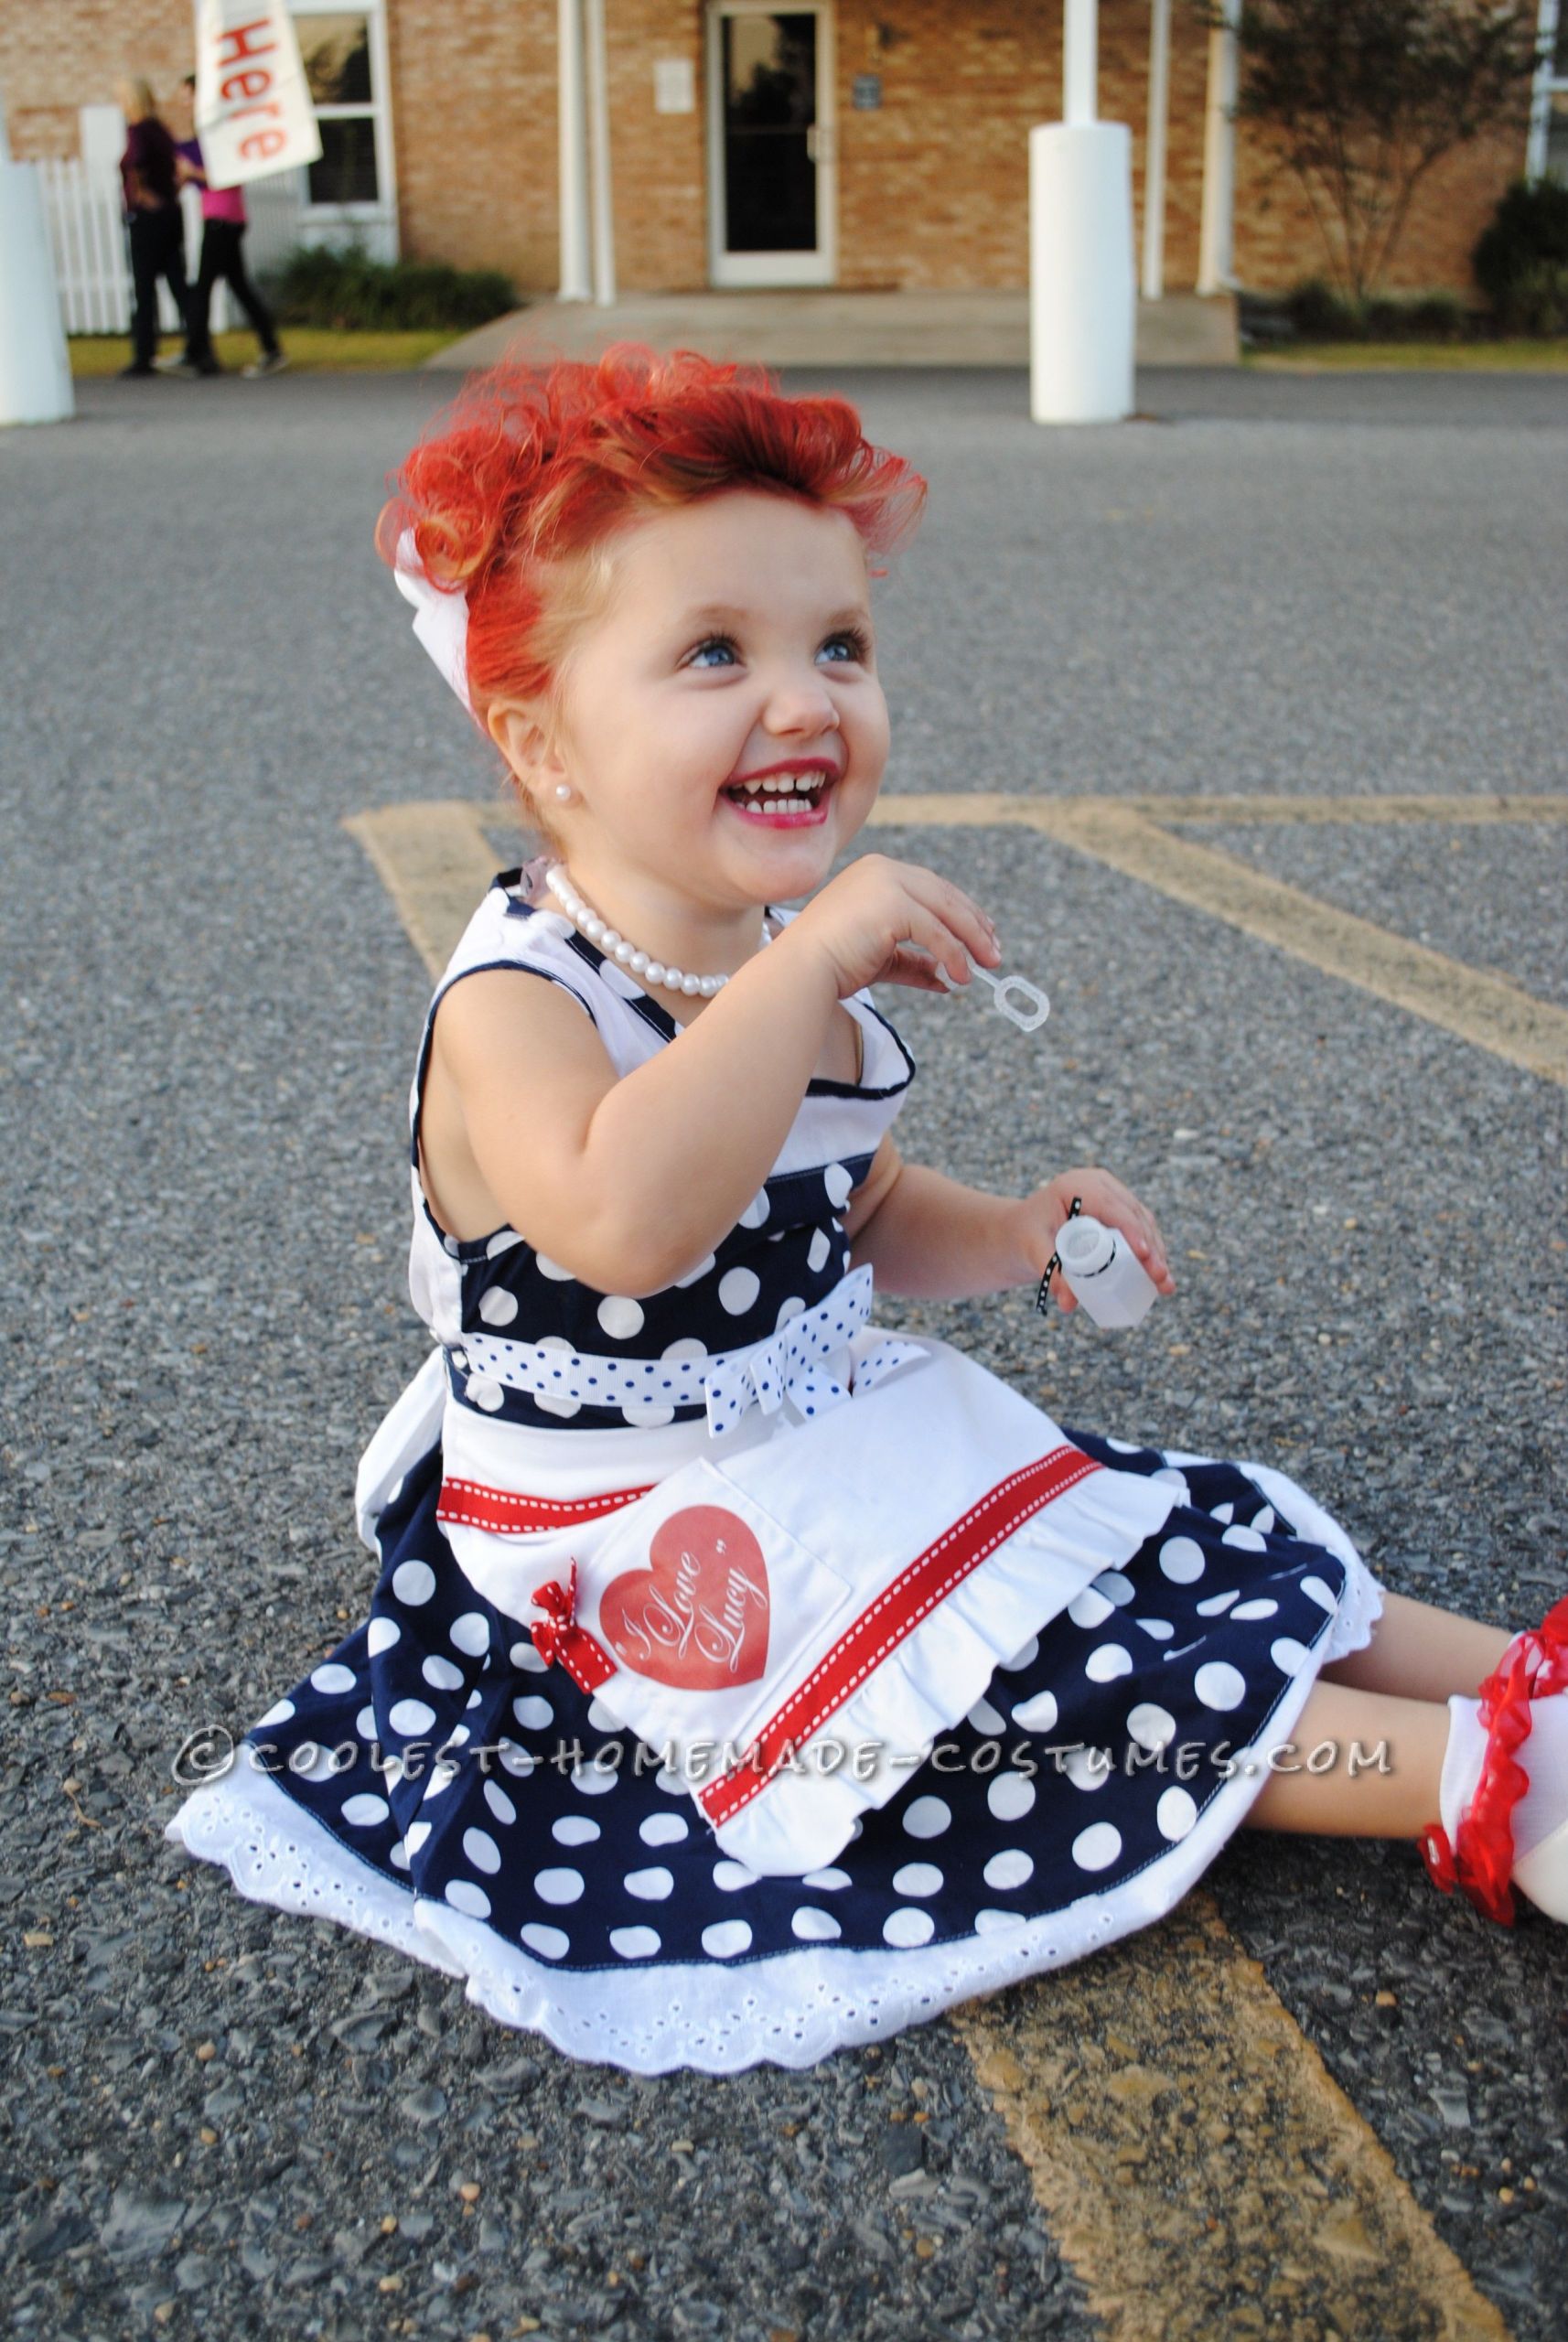 DIY Halloween Costume Toddler
 Adorable “I Love Lucy” Homemade Costume for a Toddler